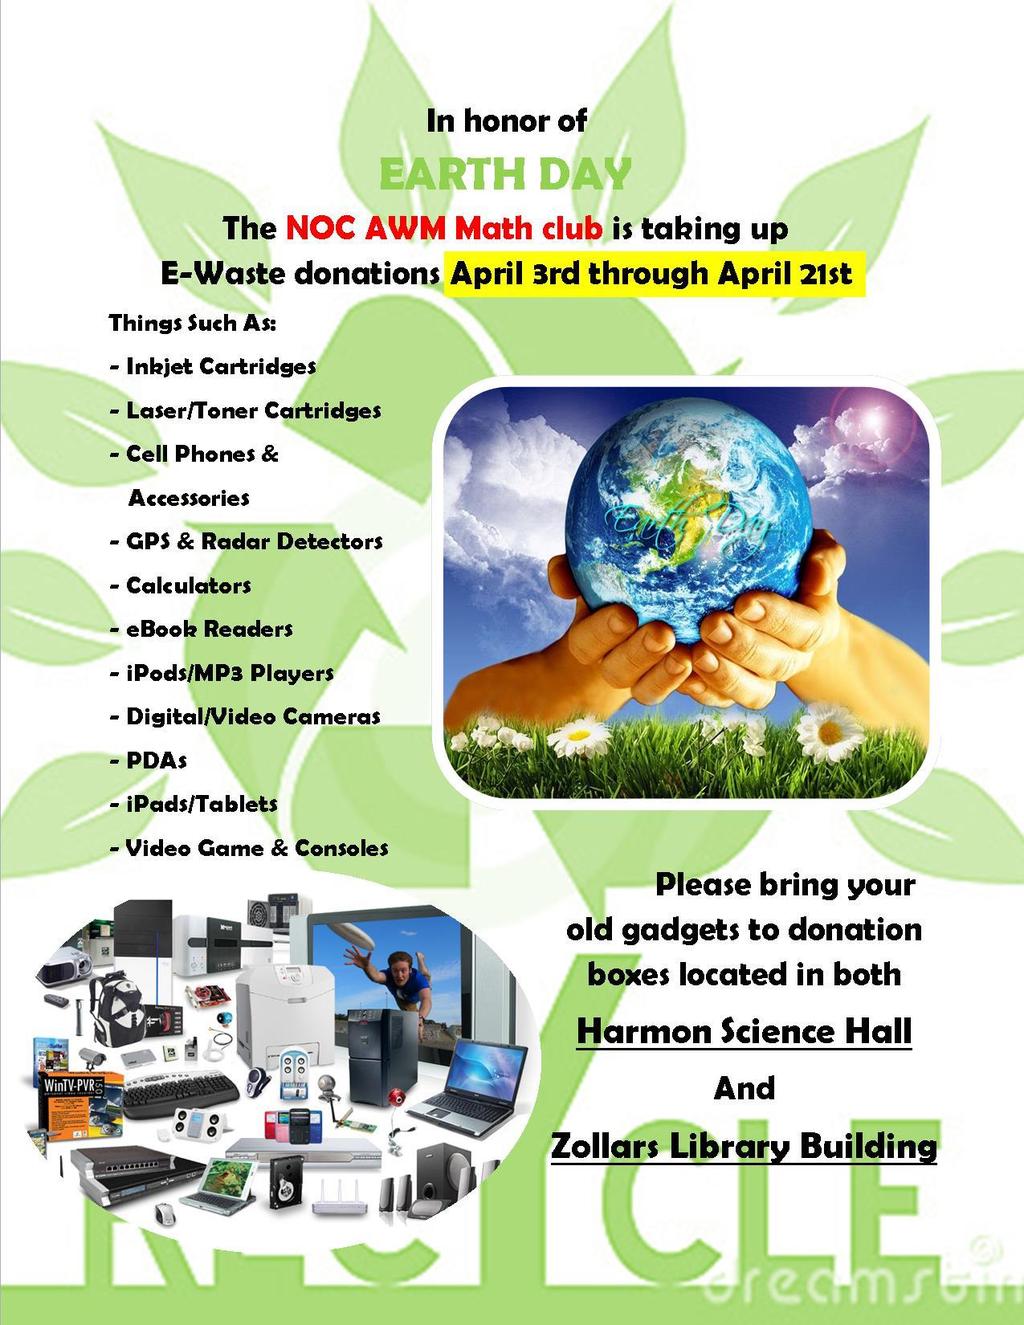 E-Waste donations wanted April